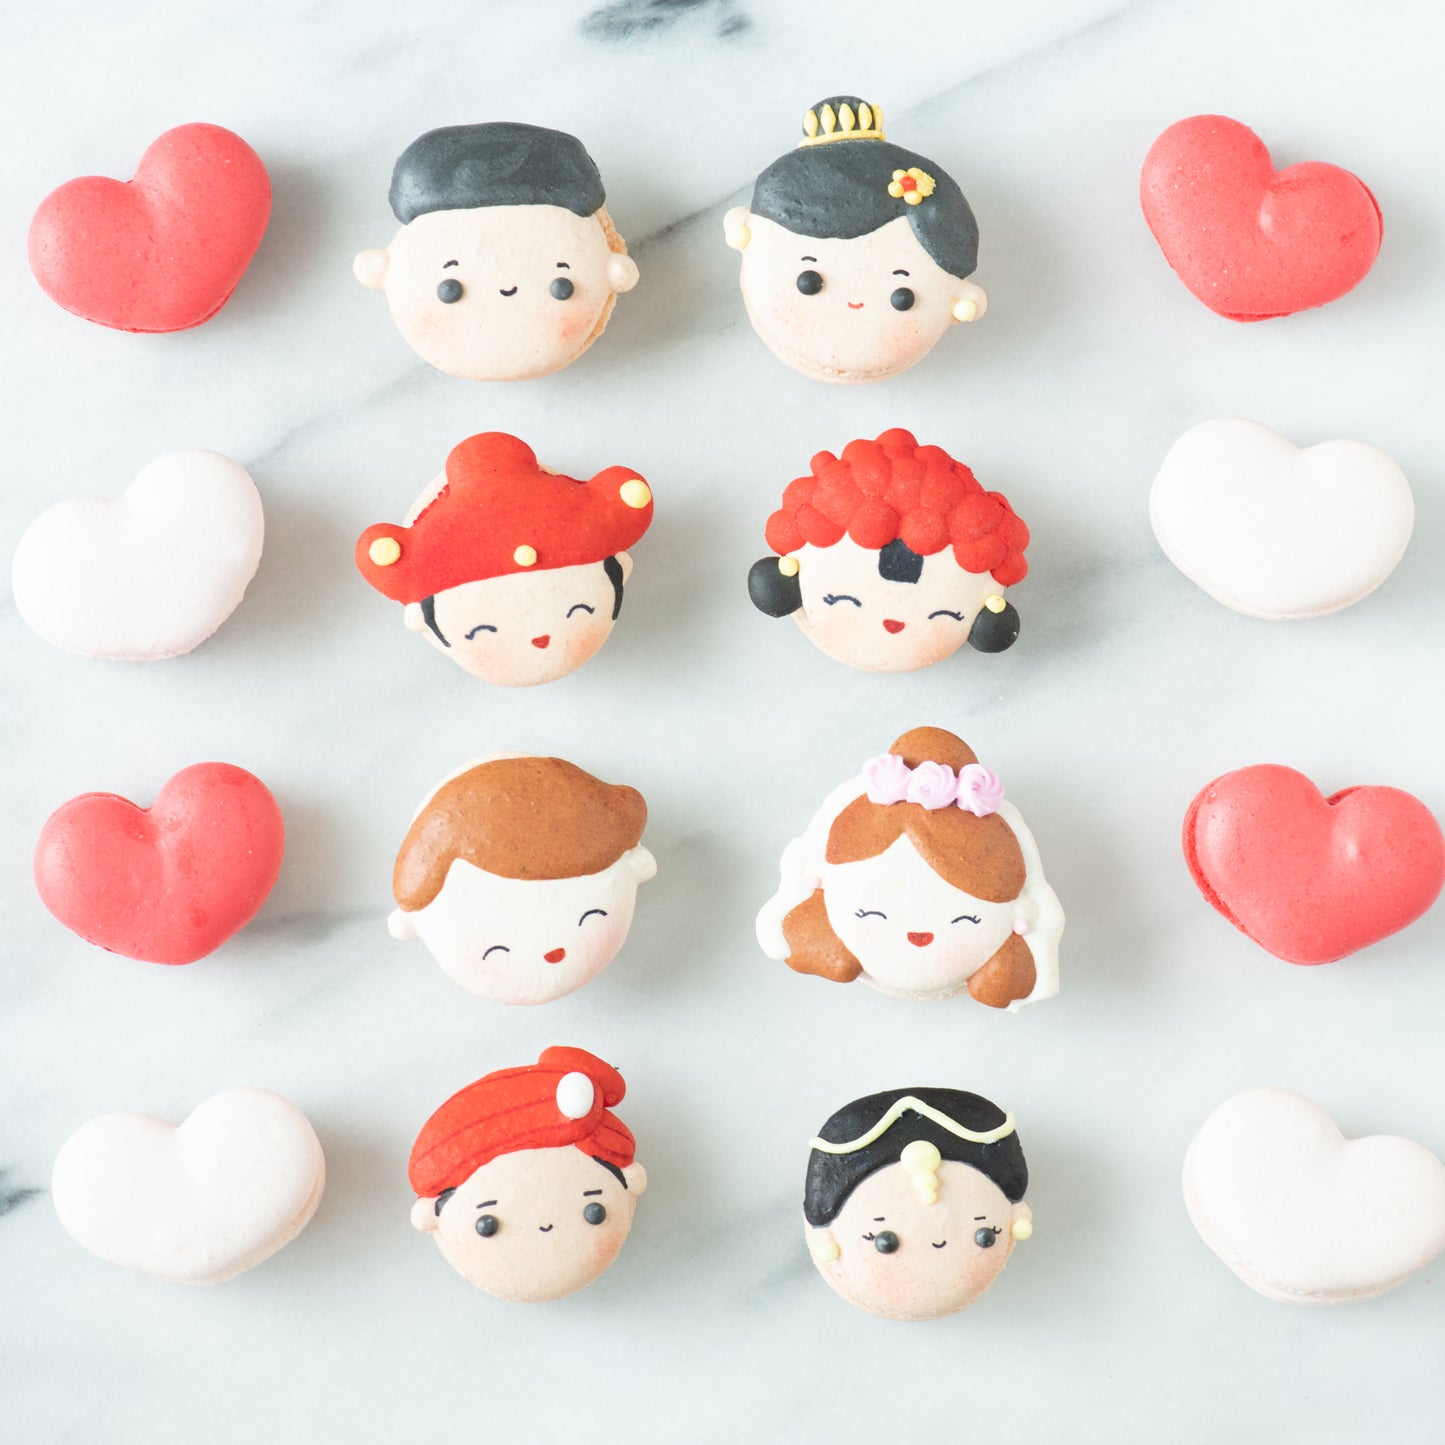 10 pcs Western Wedding Couple Macarons in a Gift Box | Complimentary Ribbon and Personalised Message | $38.80 Nett